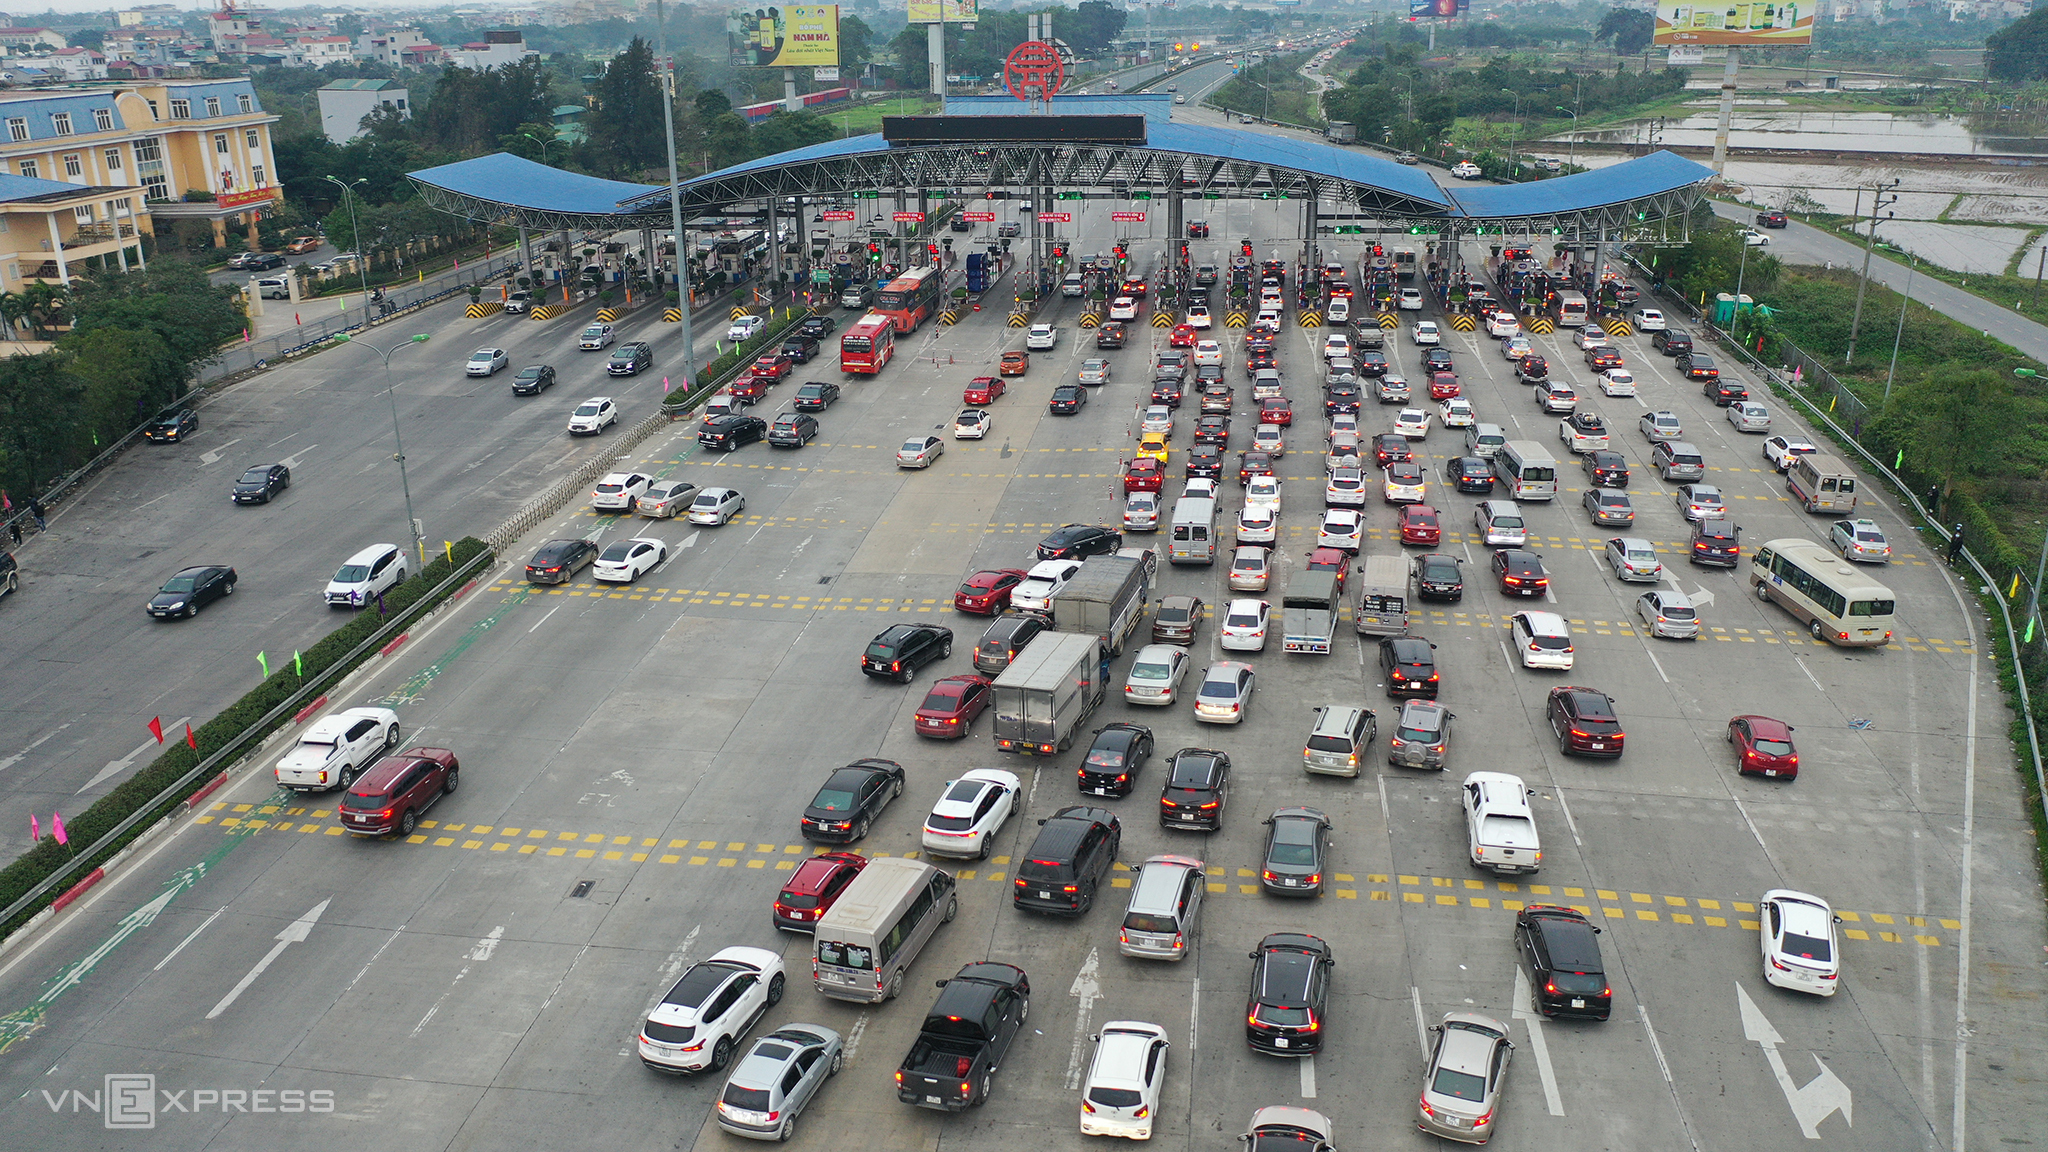 Over the past three days, the toll stations of Phap Van Cau Giay Expressway have been in a state of congestion with streams of vehicles trying to pass through and inching toward the capital.